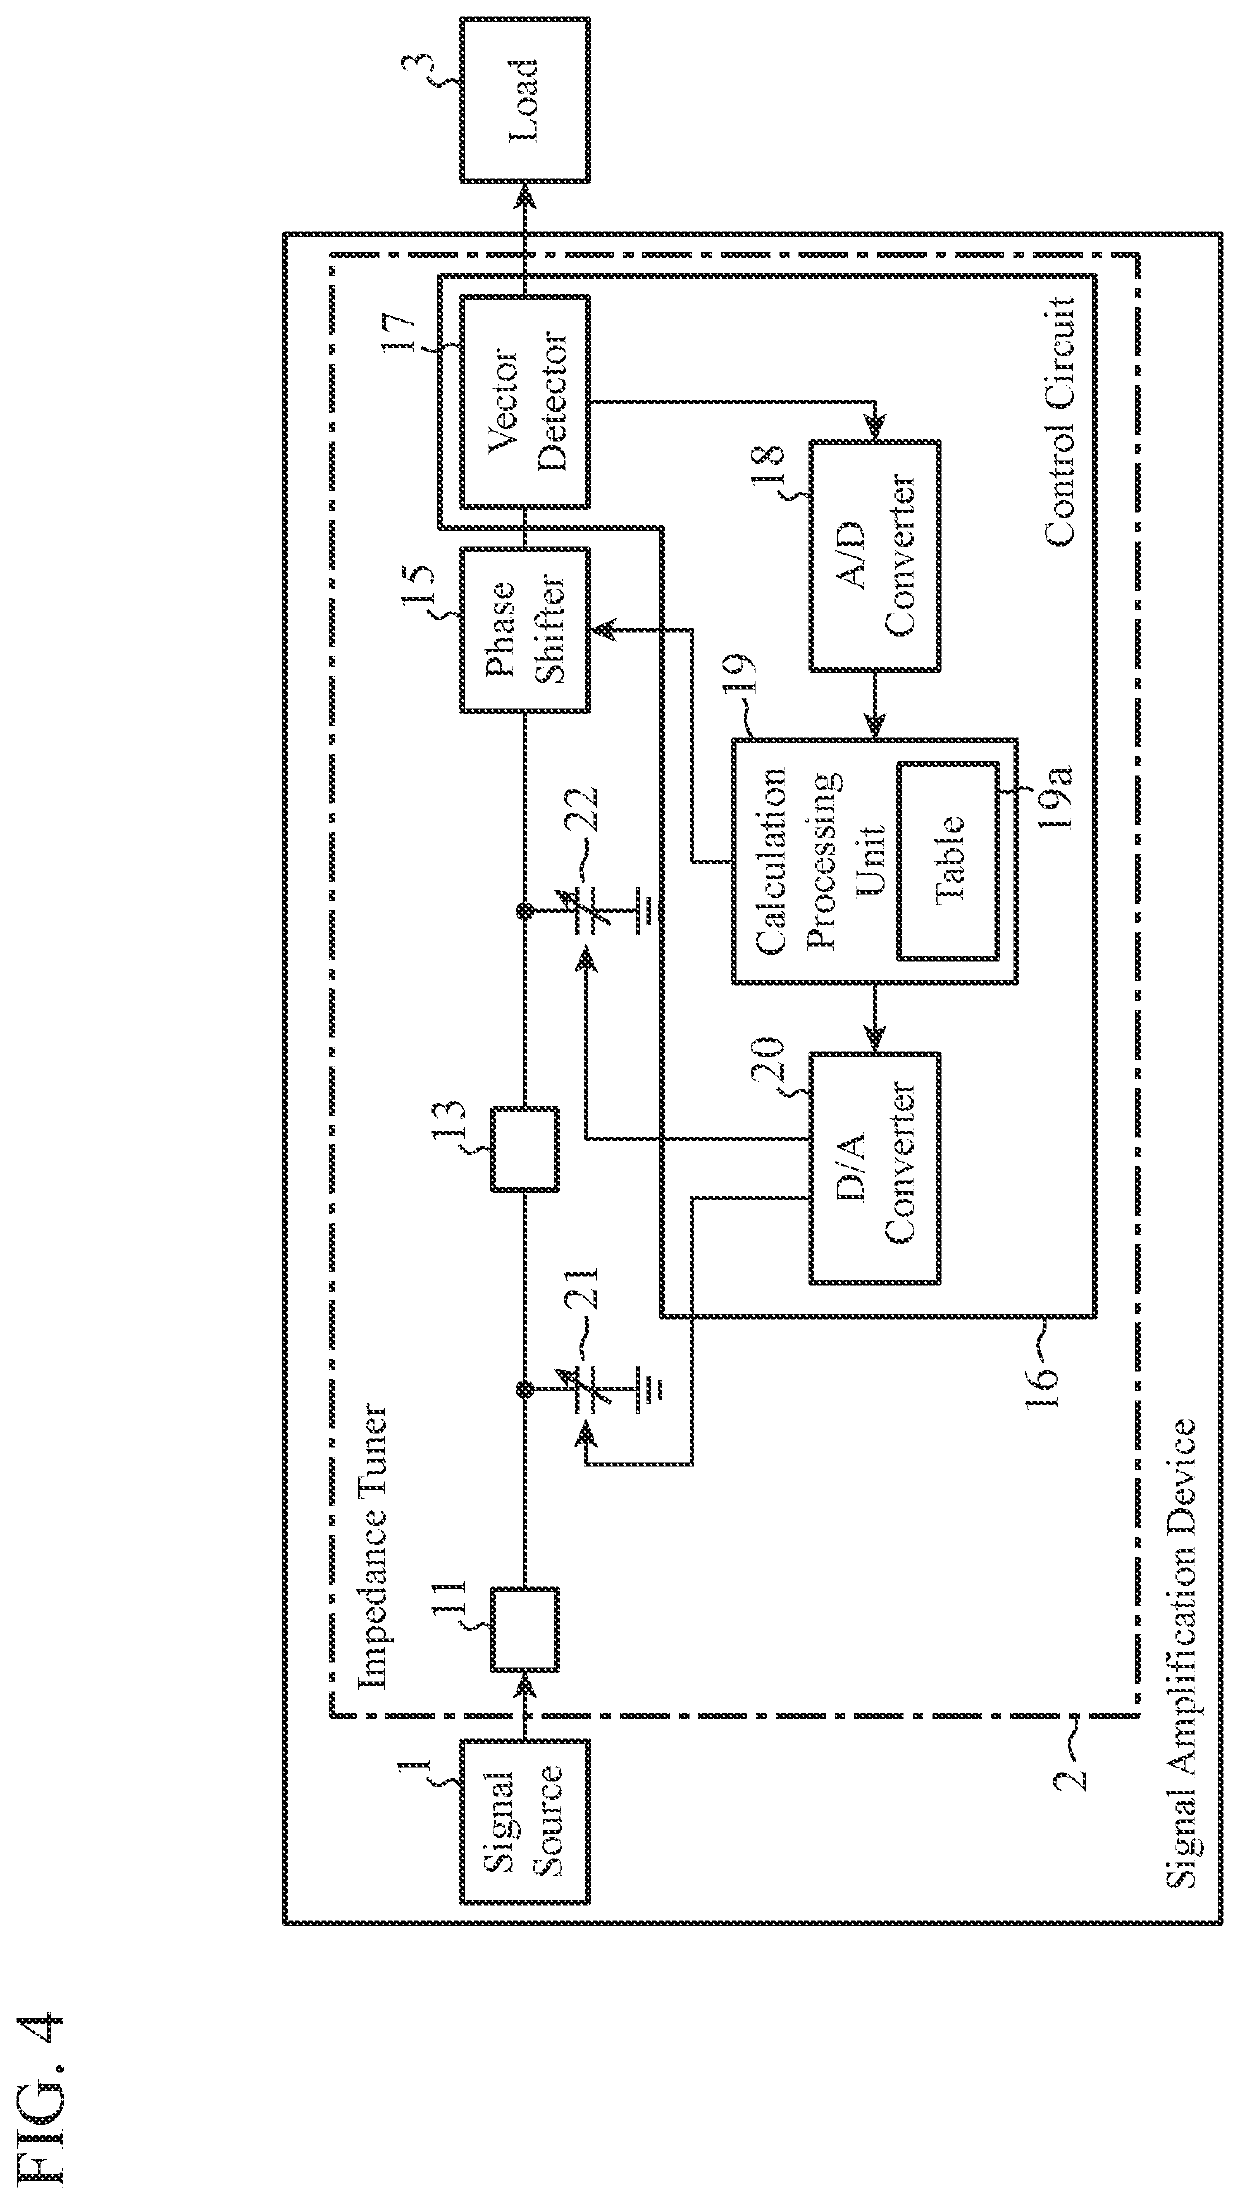 Impedance tuner and signal amplification device